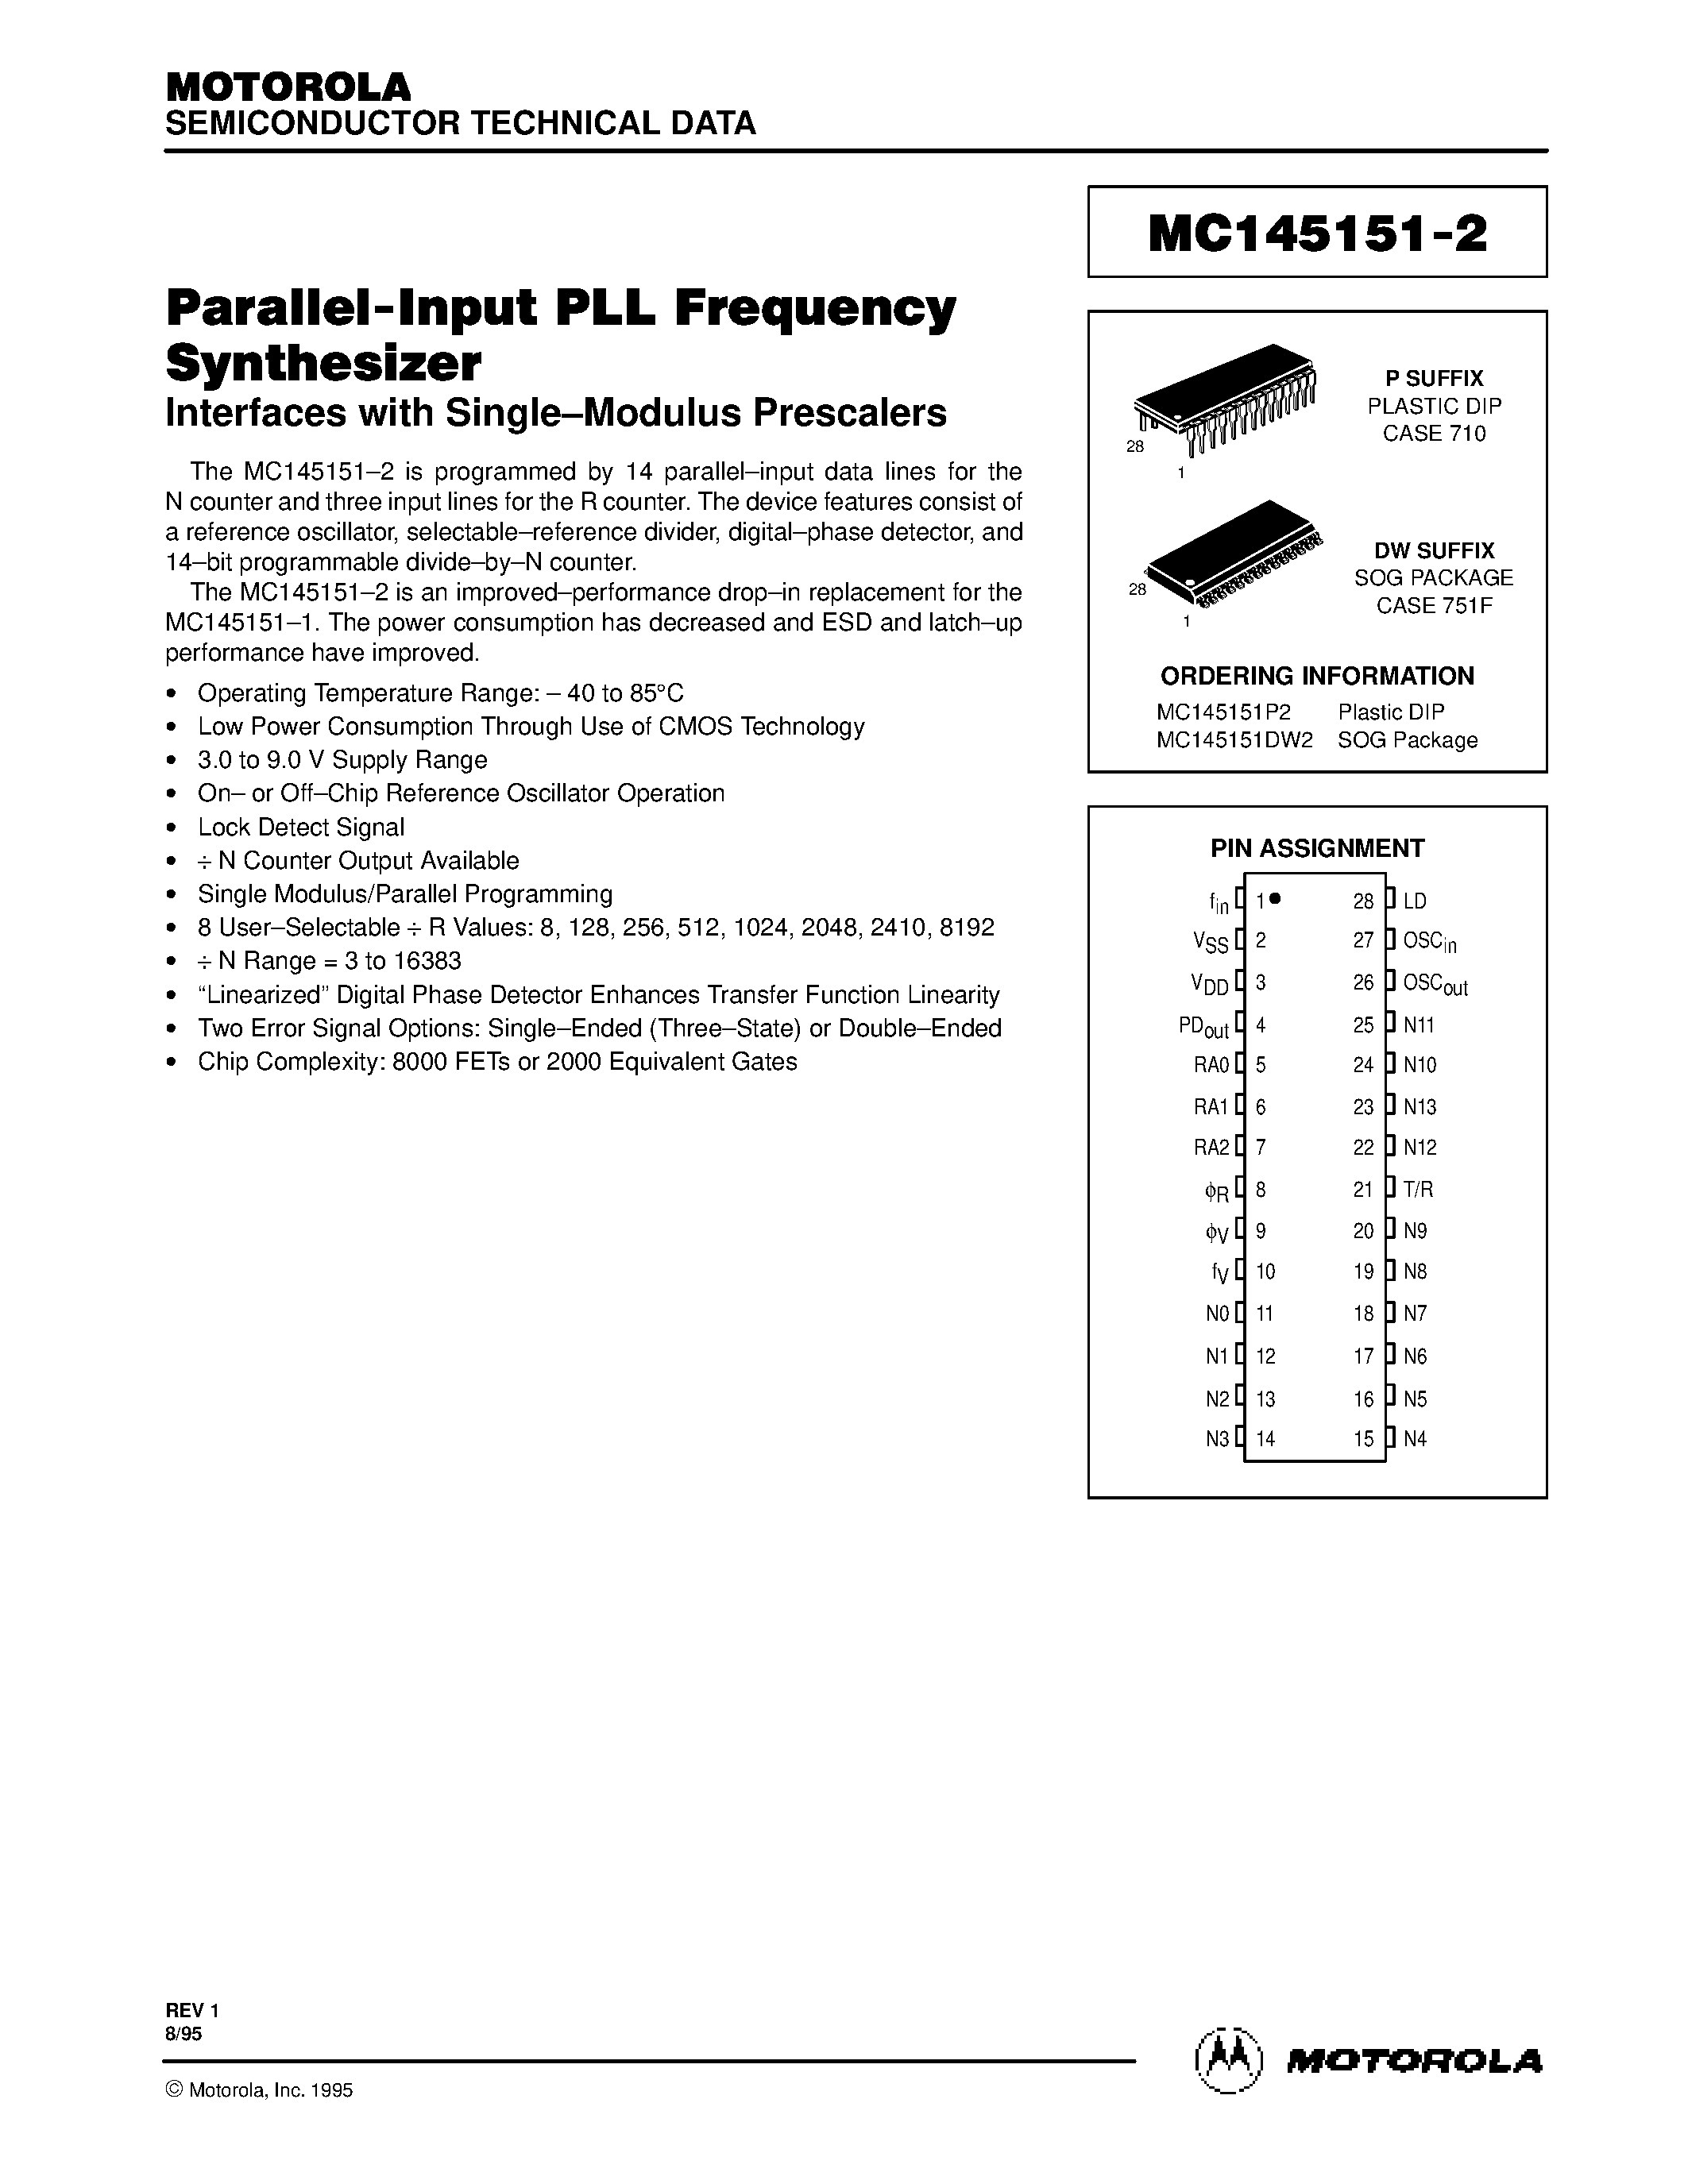 Datasheet MC145151-2 - (MC145151-2 - MC145158-2) Parallel-Input PLL Frequency Synthesizer page 2